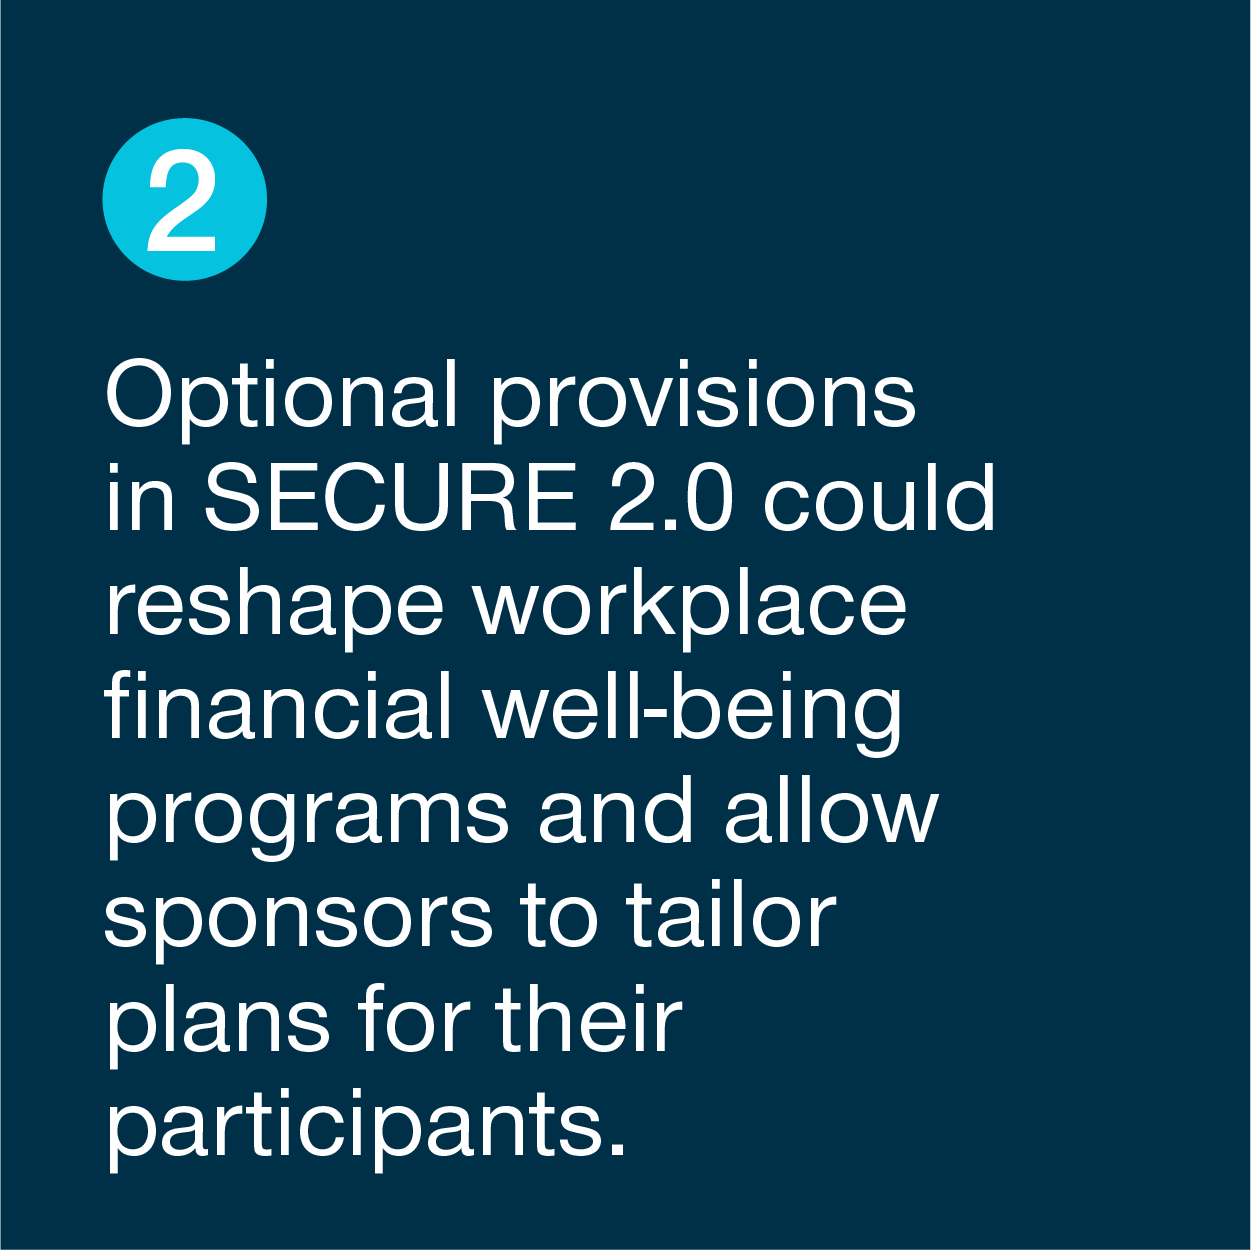 Optional provisions in SECURE 2.0 could reshape workplace financial well-being programs and allow sponsors to tailor plans